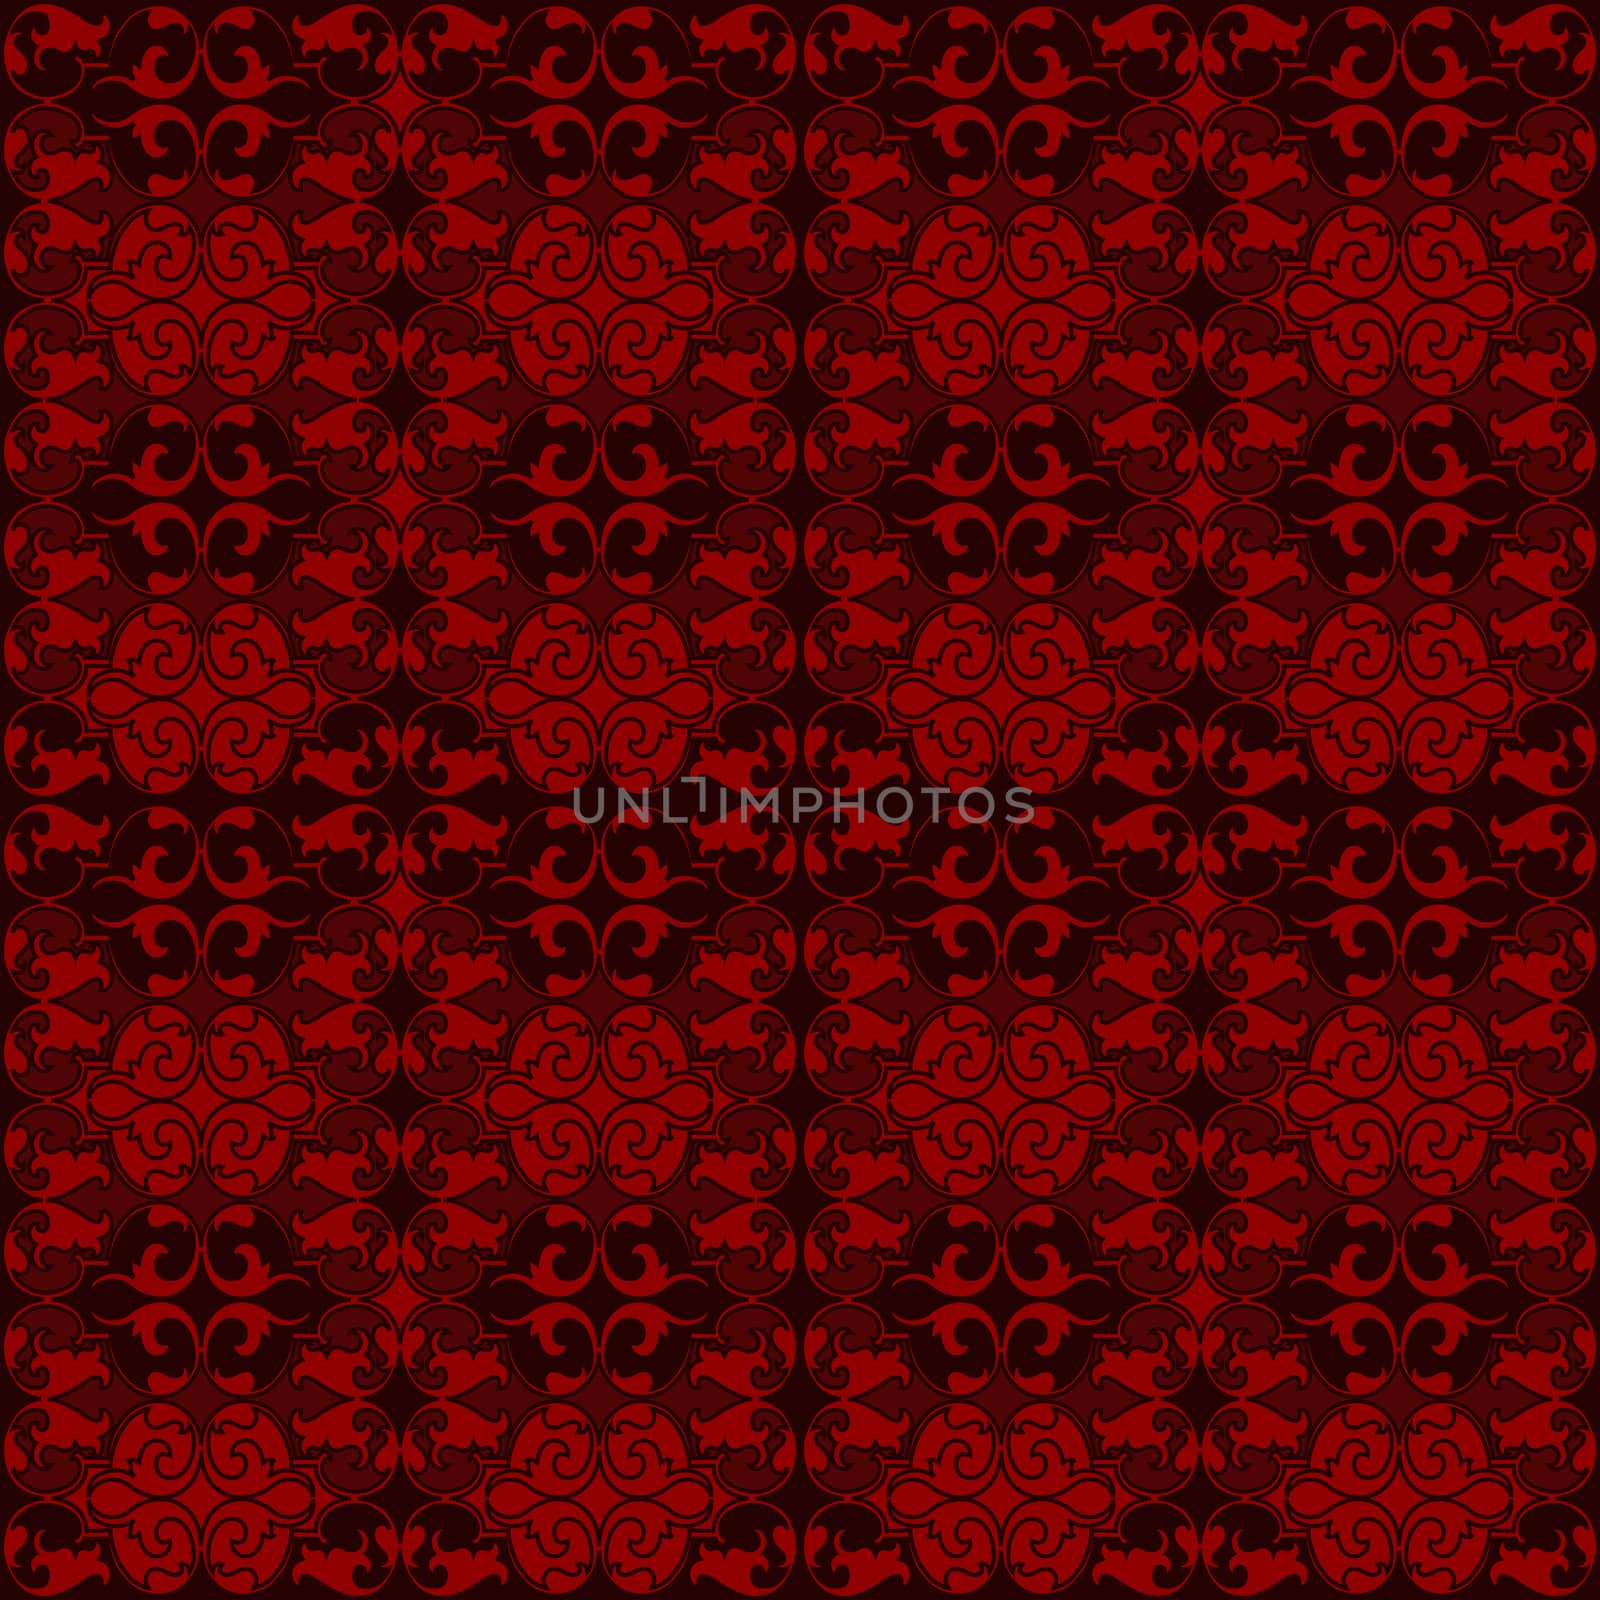 Red damask tapestry with floral patterns by hibrida13